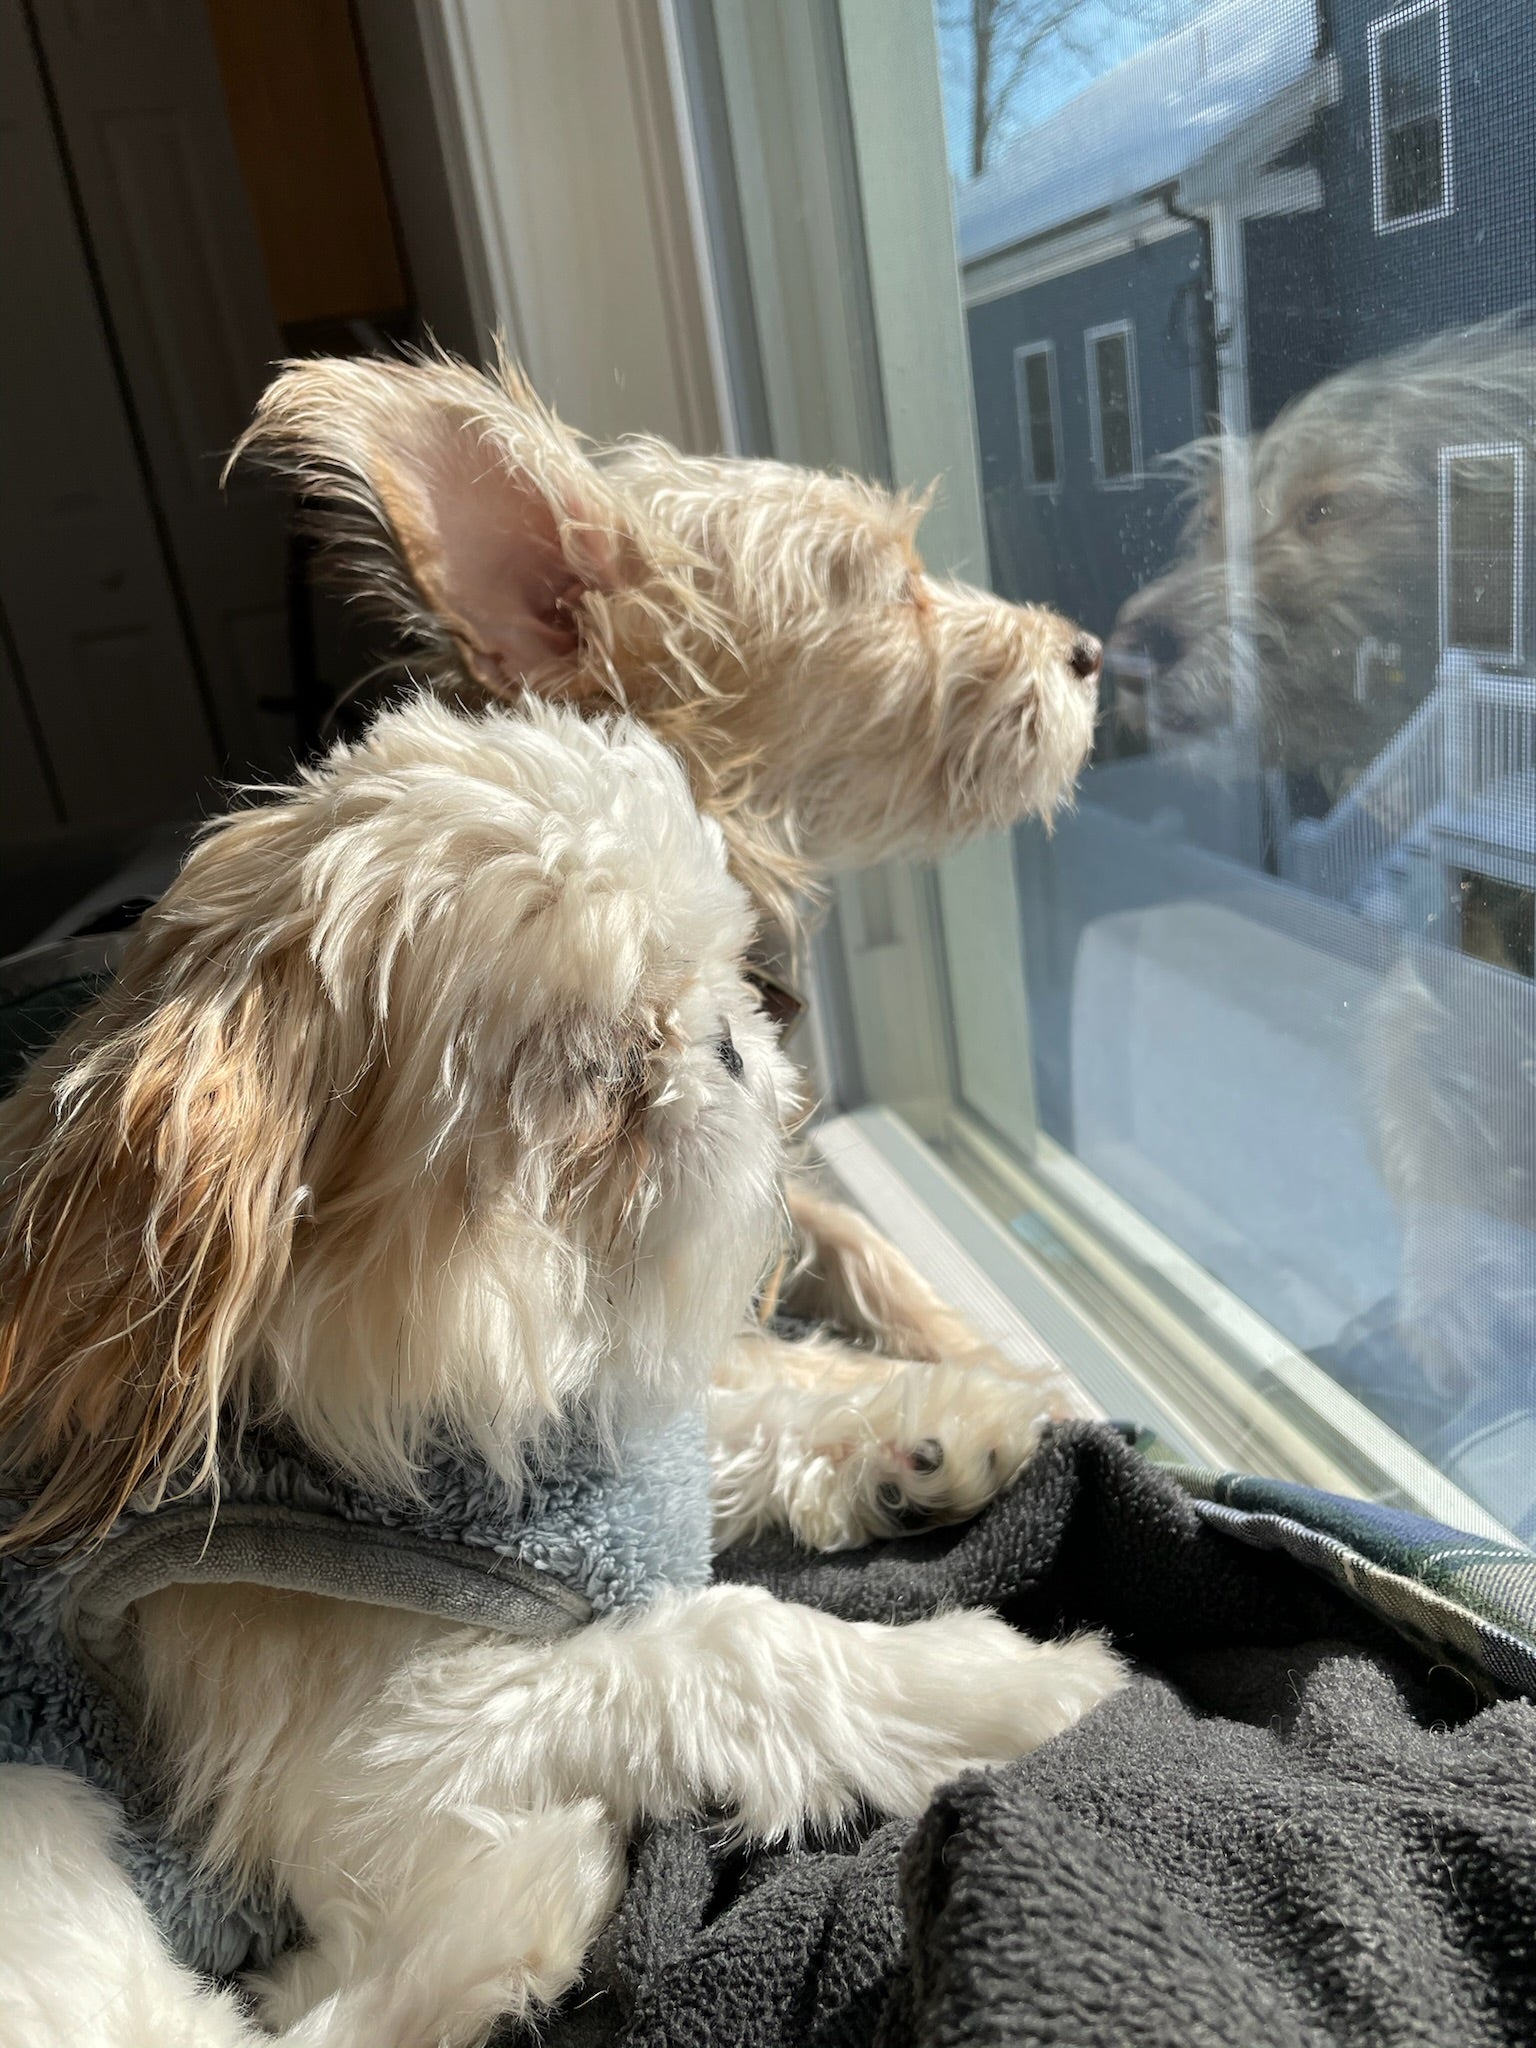 Two small white and beige dogs look out a window. Their paws are on the window sill and it’s winter outside, which is obvious with the snow on the roof of the neighbouring house.